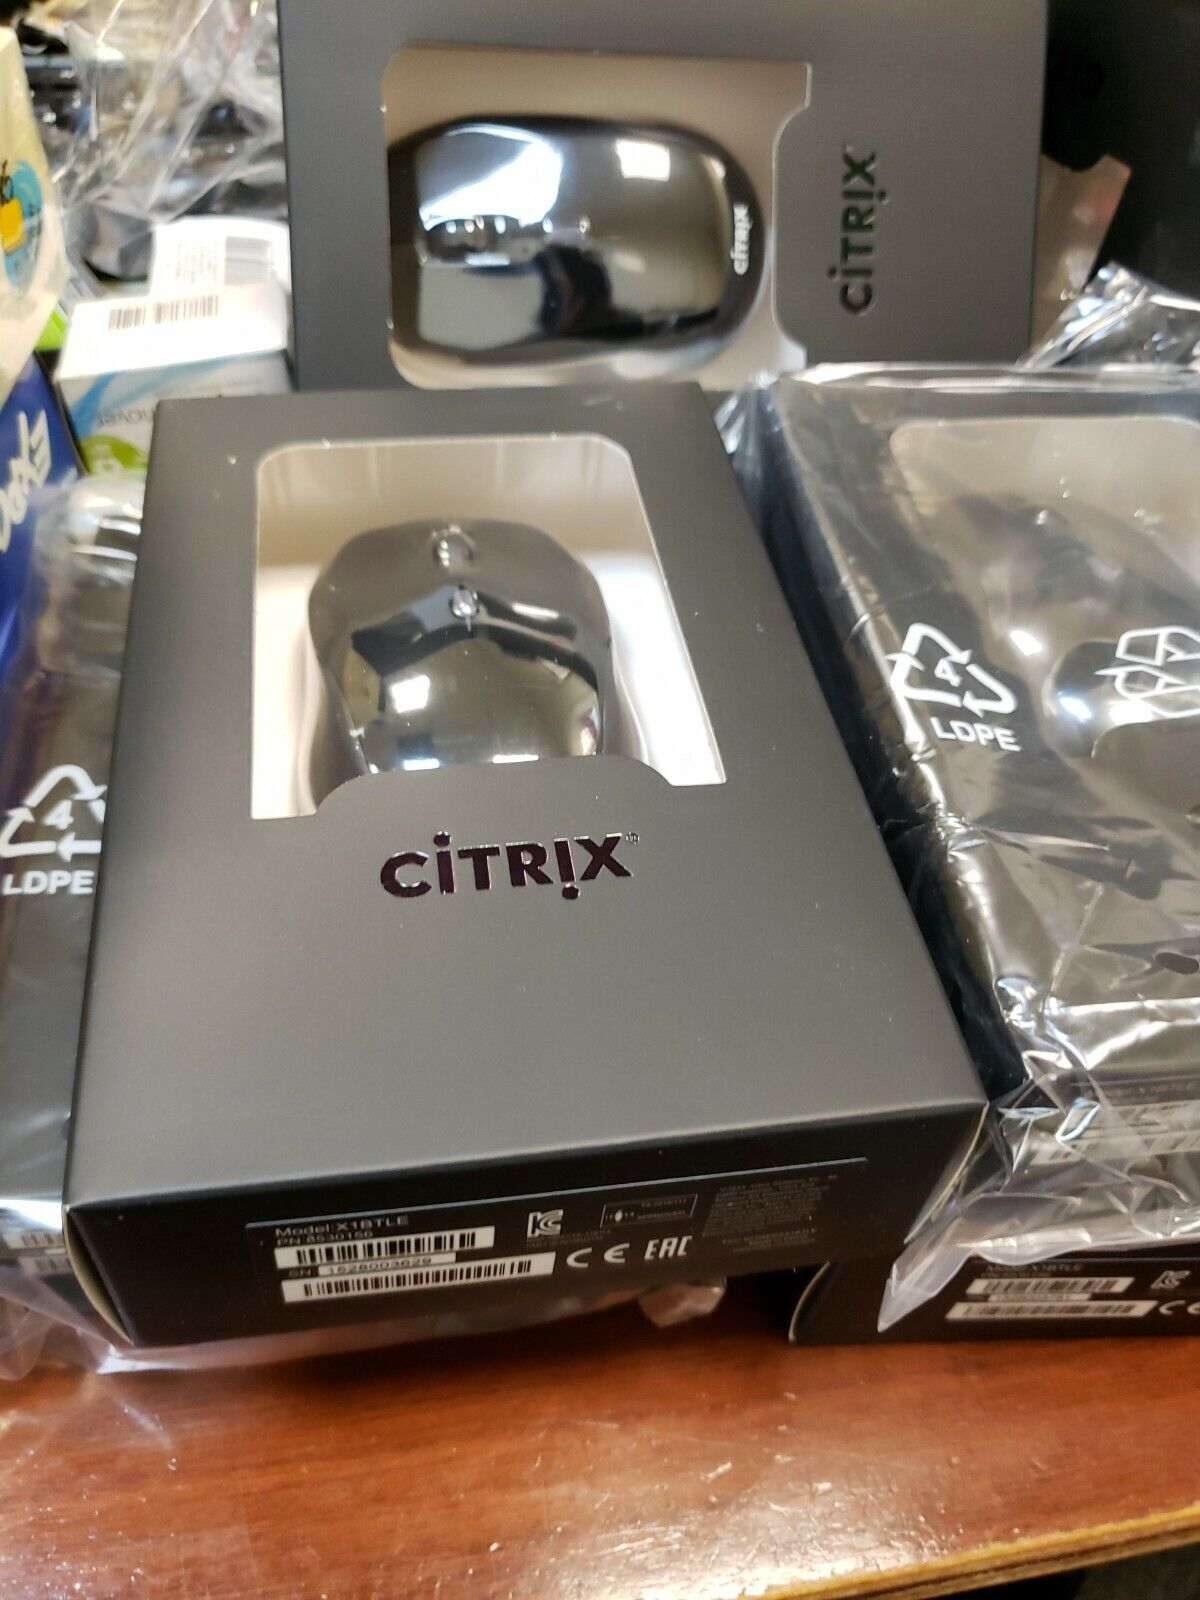 NEW Citrix Citrix X1 Mouse Free Shipping with Tracking 